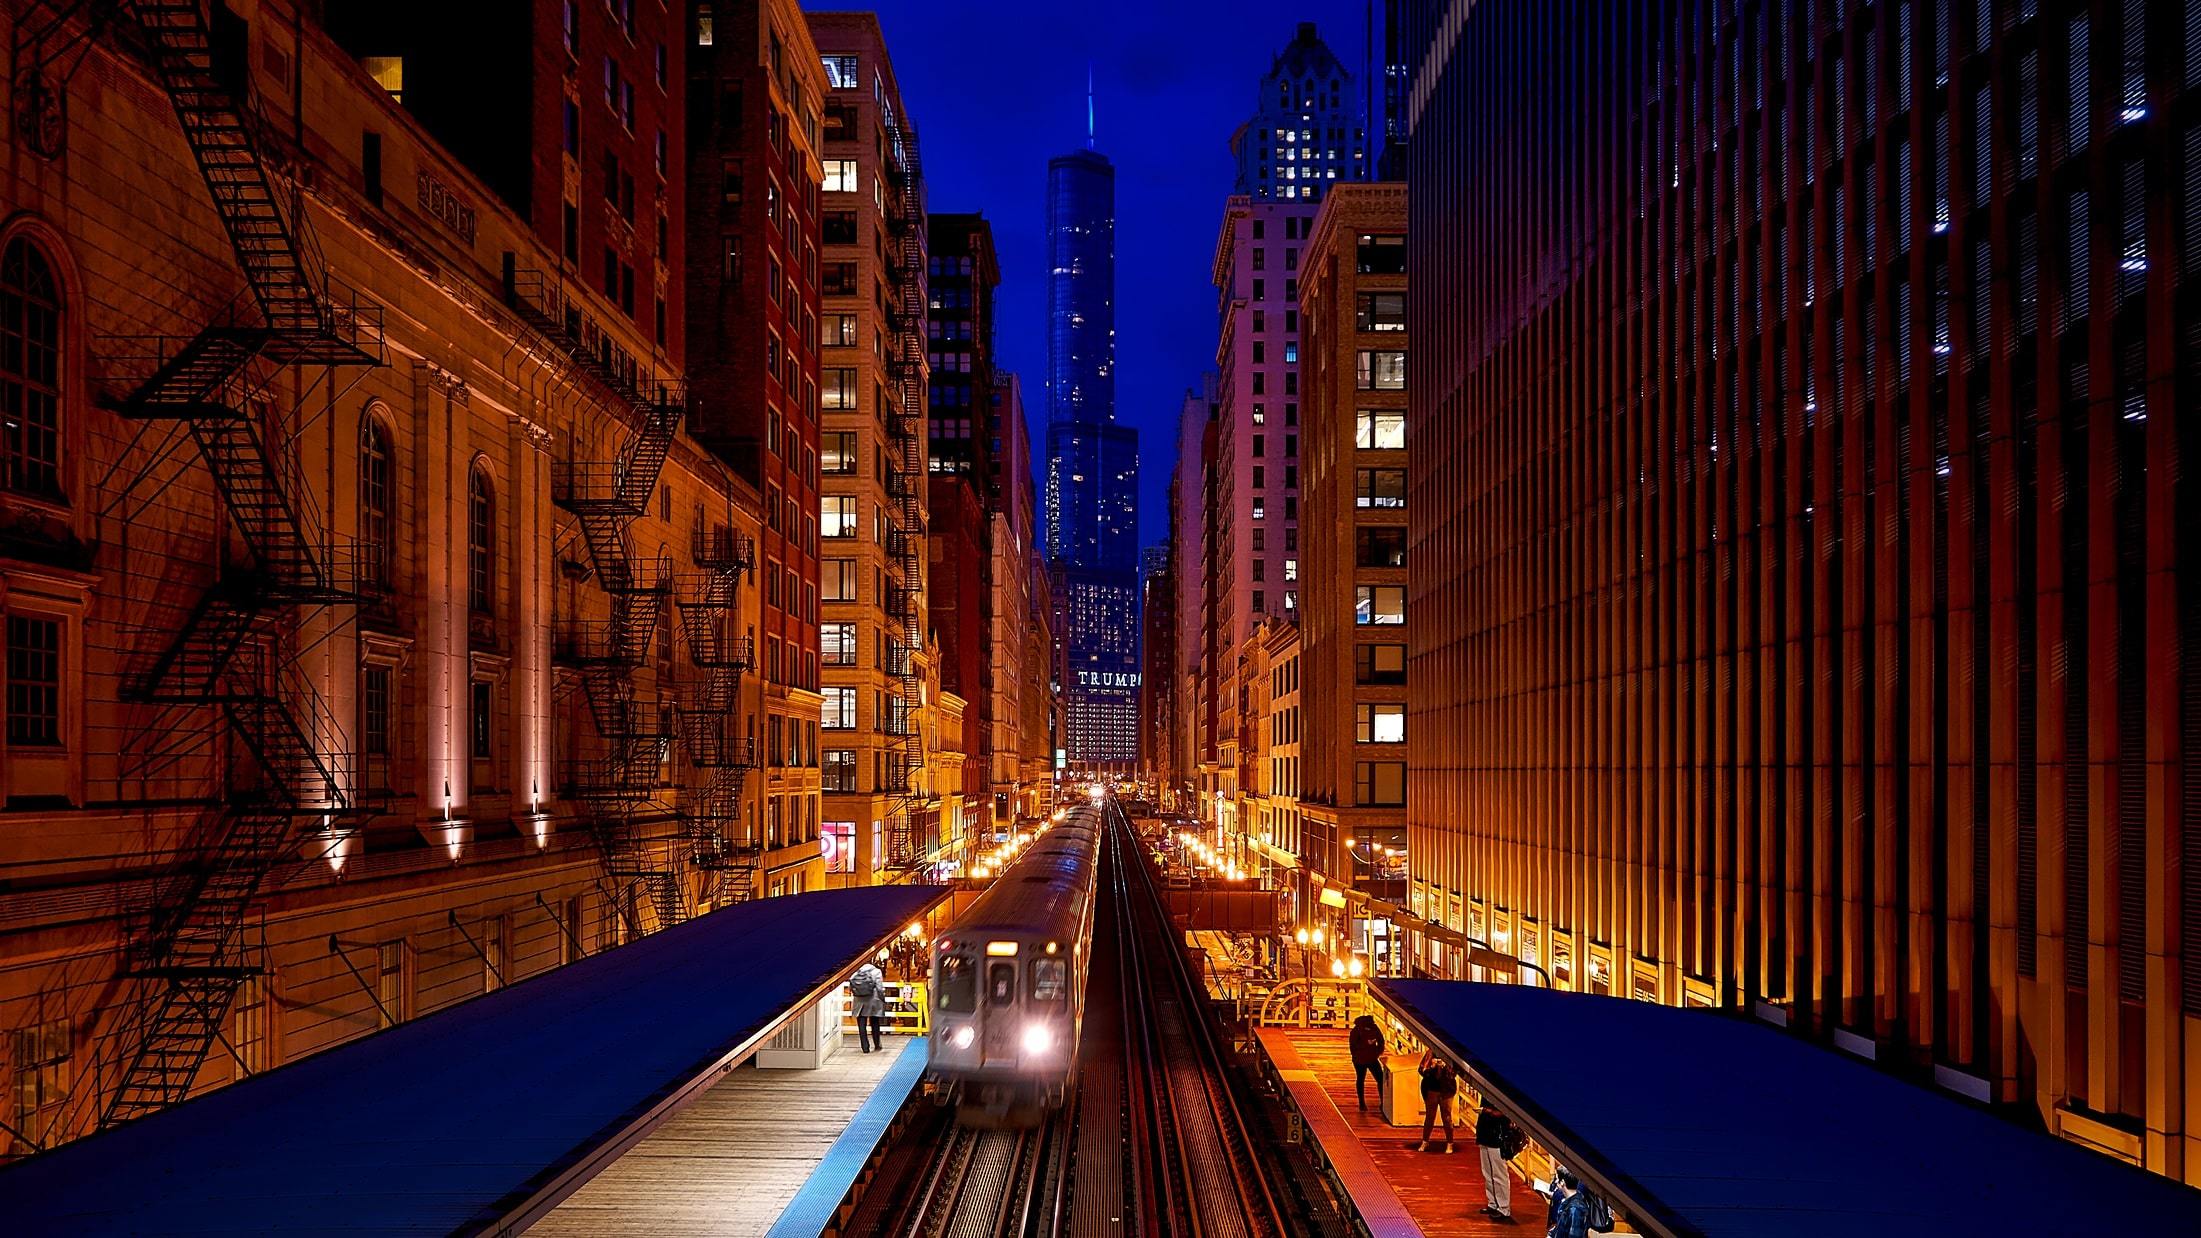 Backpacking Chicago train coming in between buildings